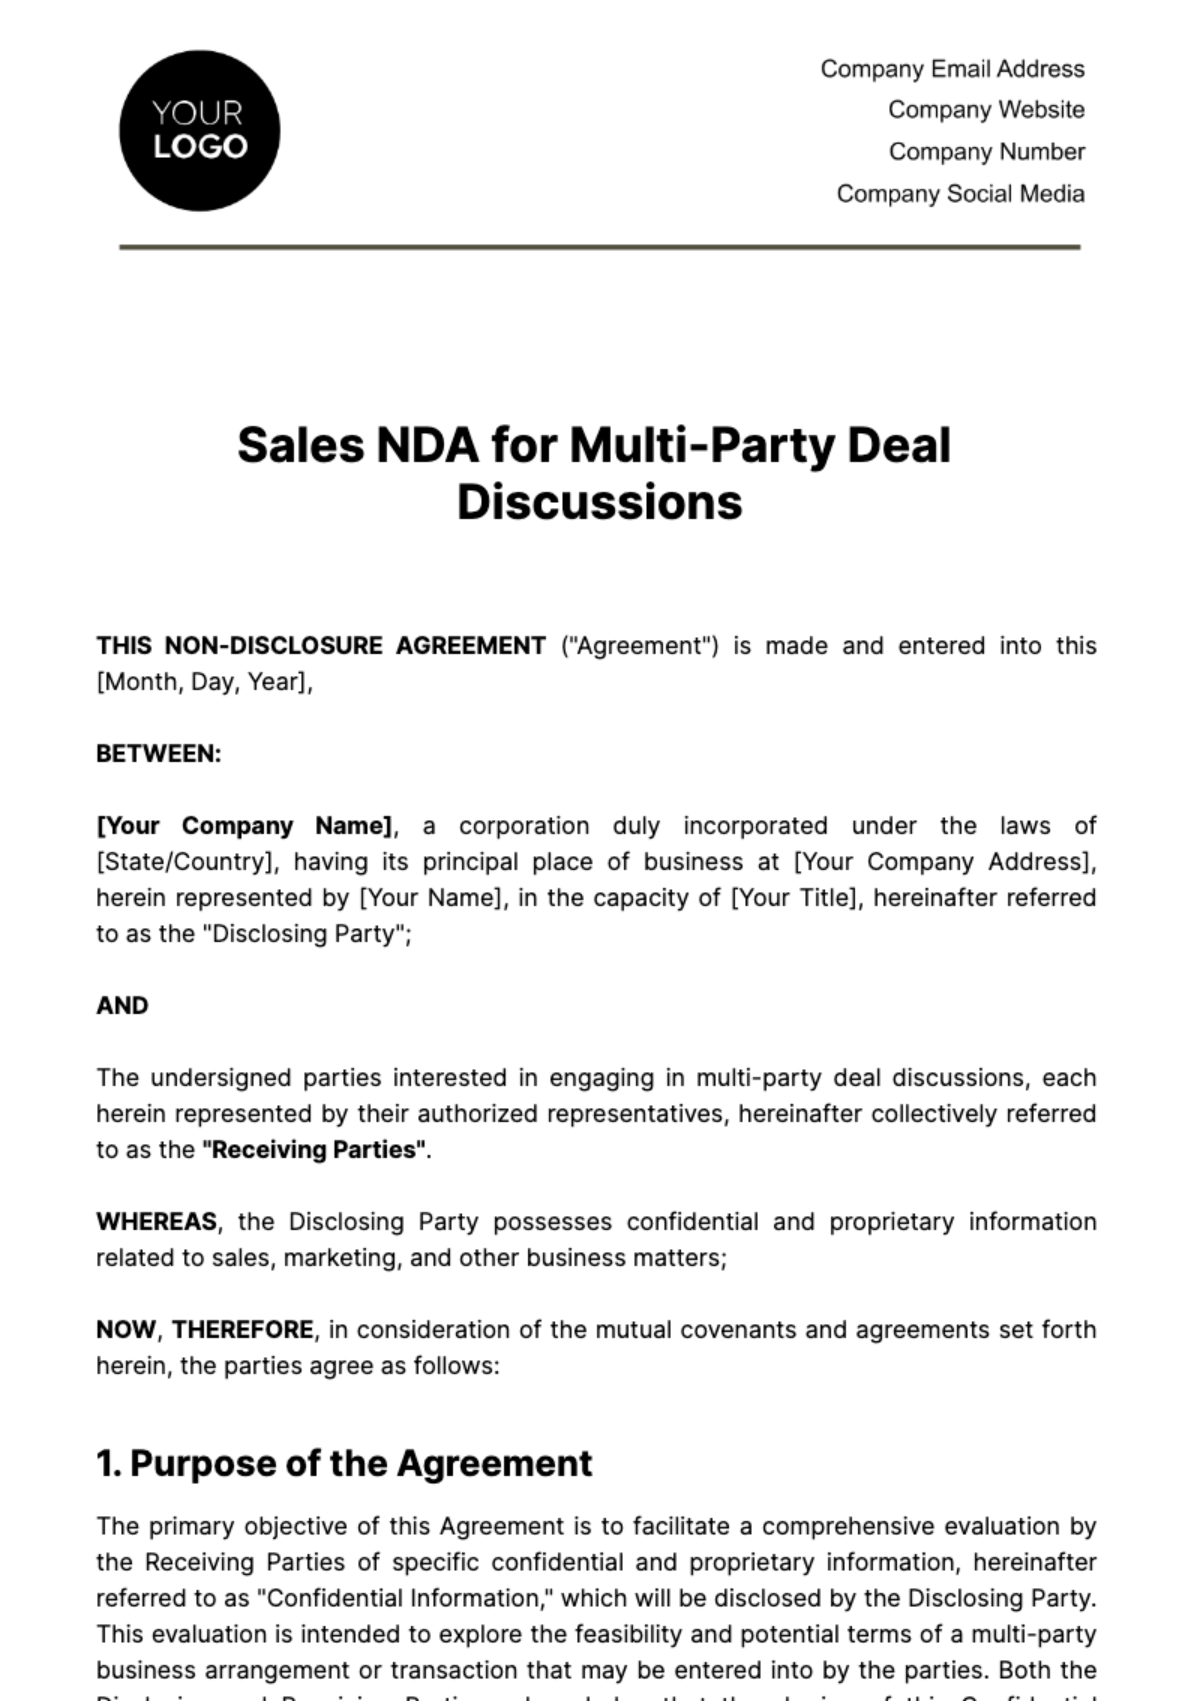 Free Sales NDA for Multi-Party Deal Discussions Template